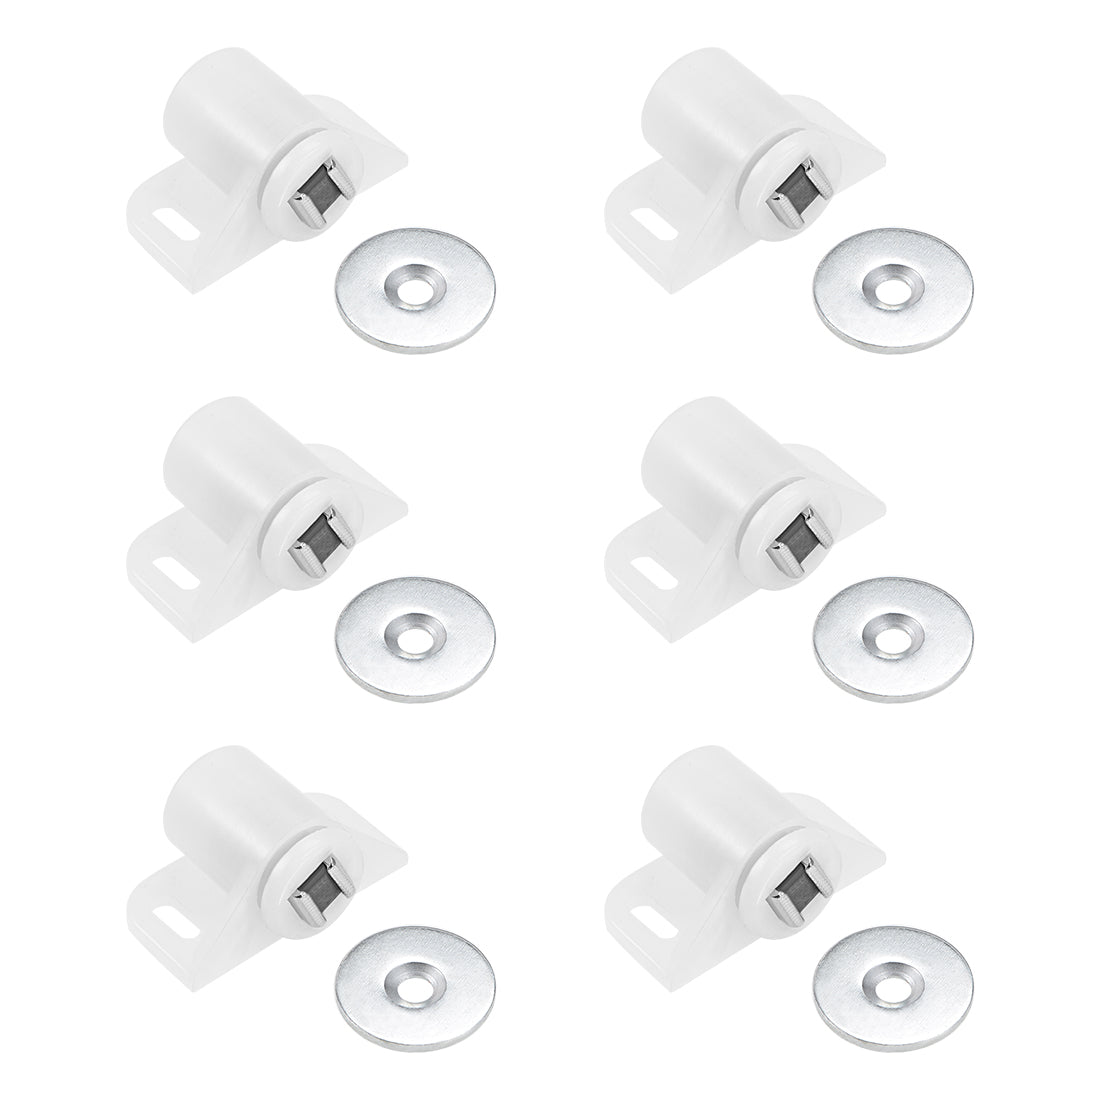 uxcell Uxcell Magnetic Latches Catch, Cabinet Door Magnet Latch for Cupboard Closet White 6pcs